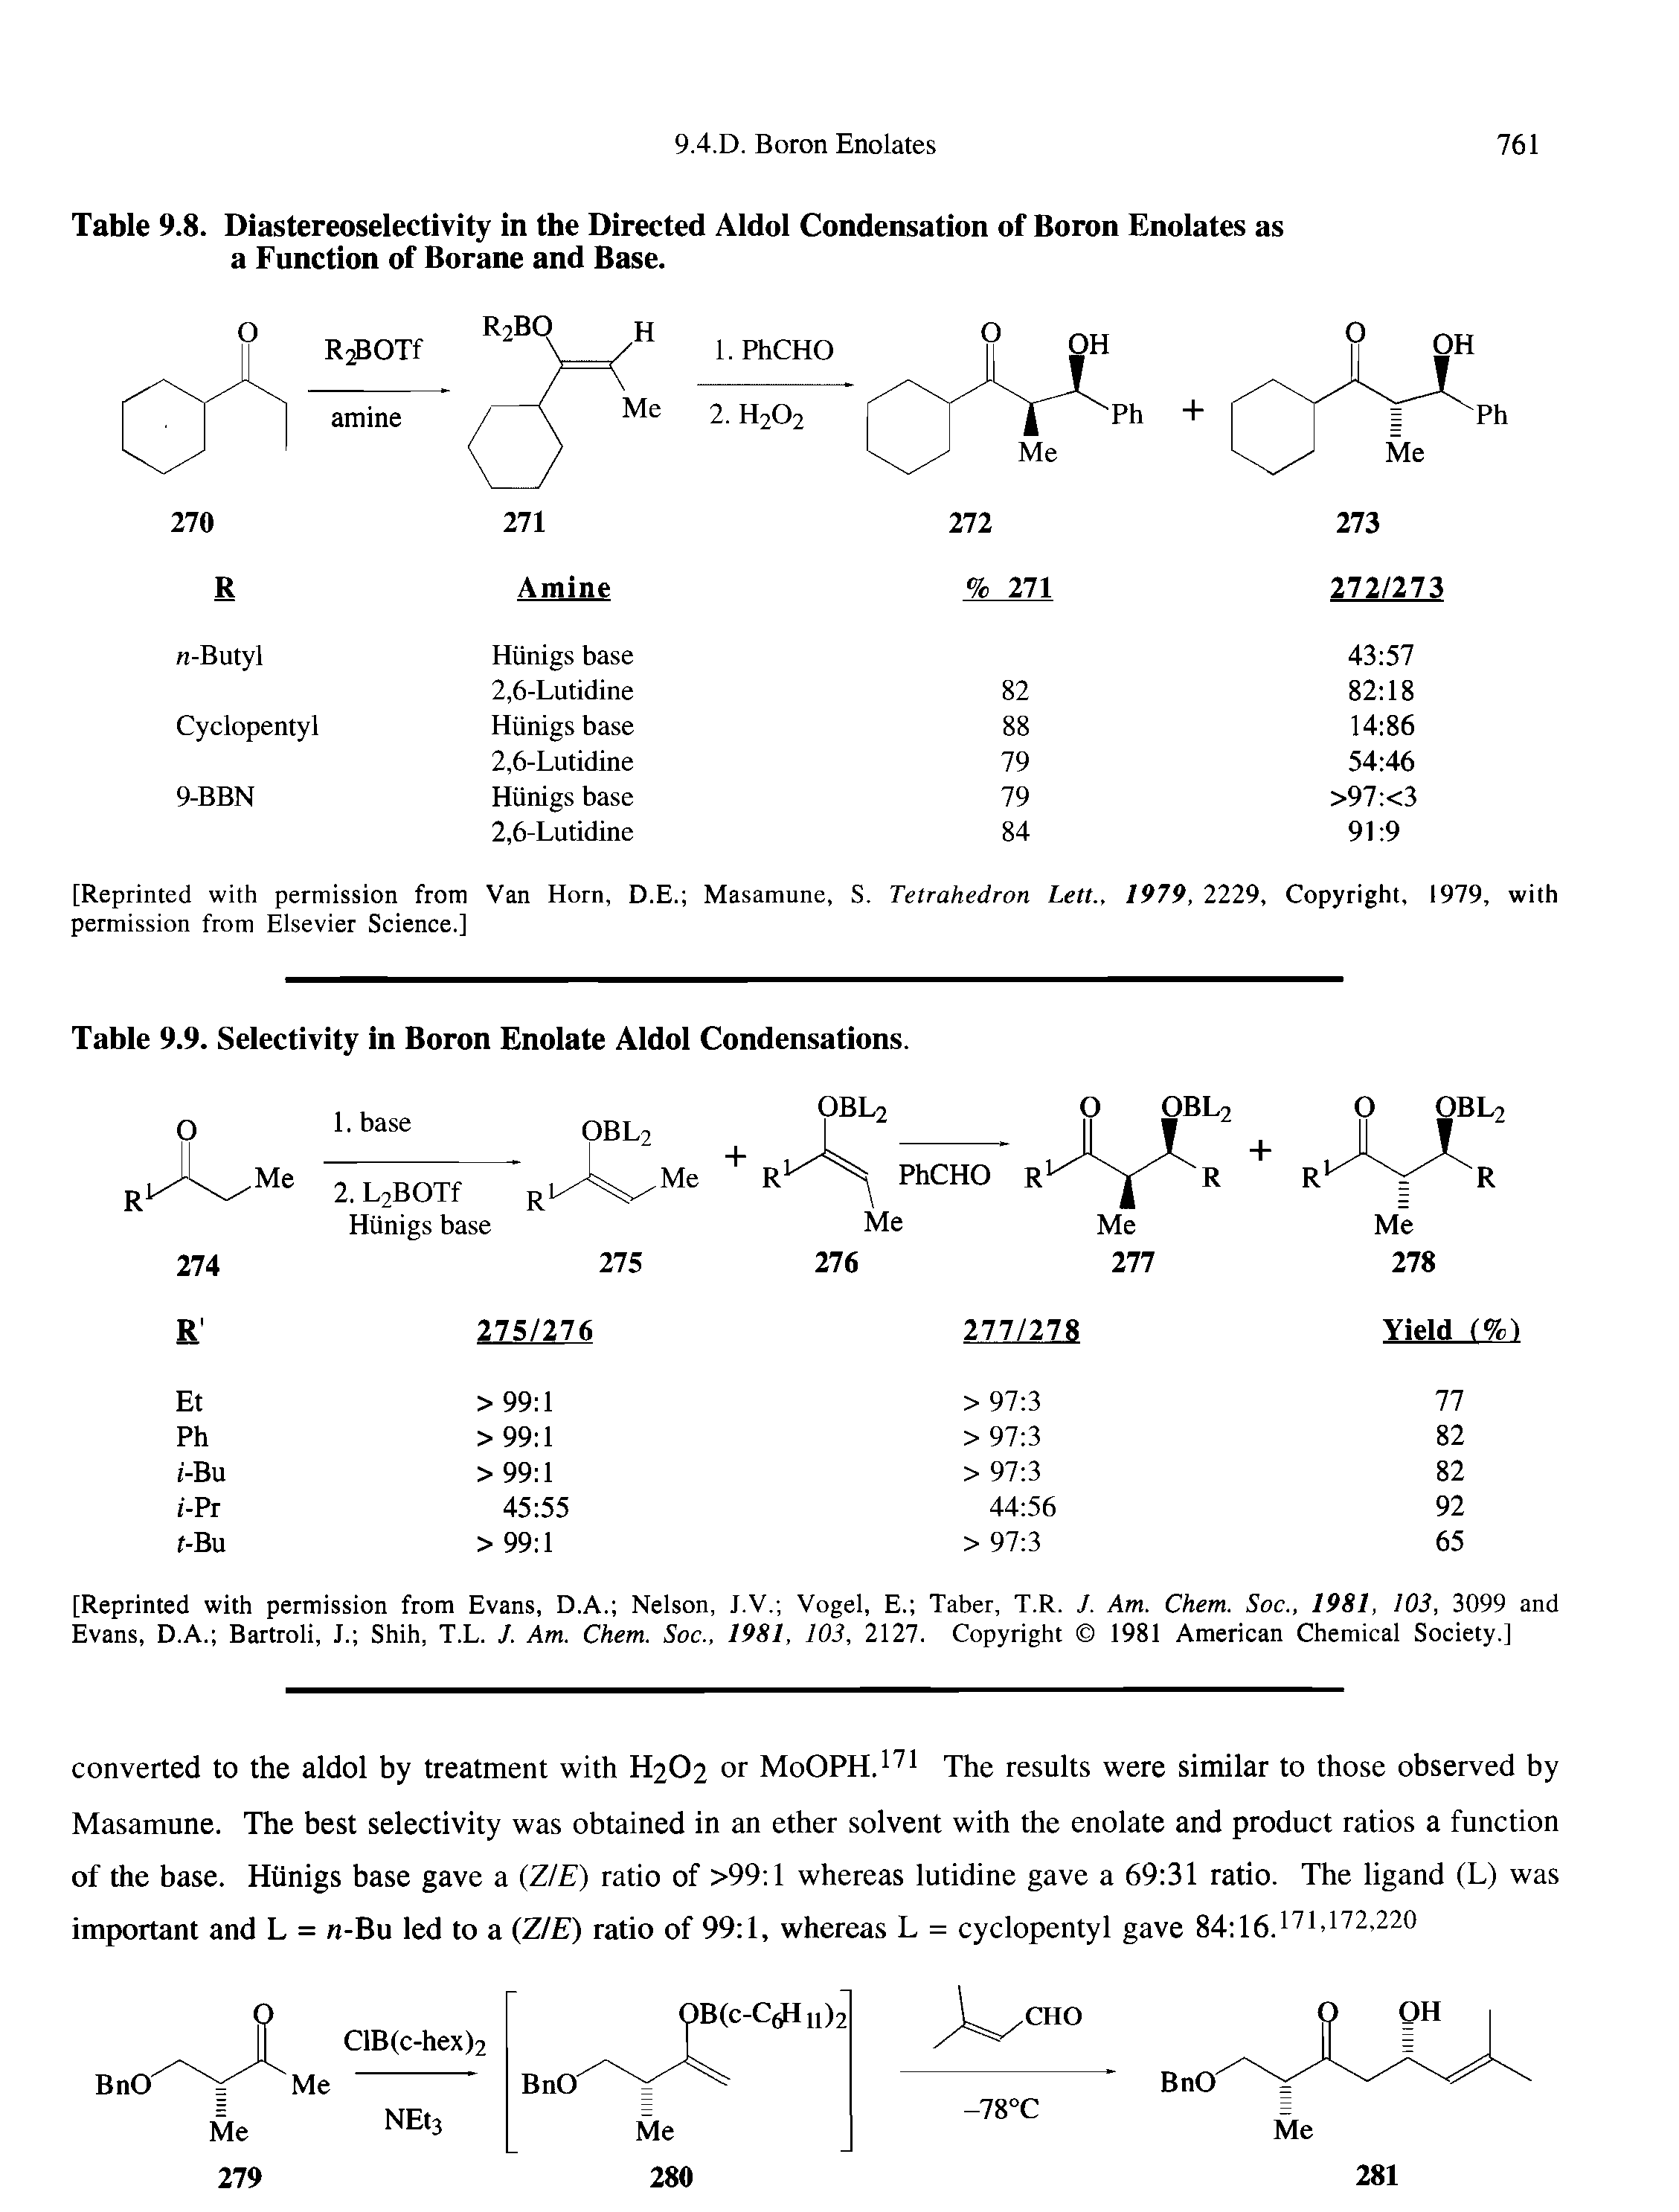 Table 9.8. Diastereoselectivity in the Directed Aldol Condensation of Boron Enolates as a Function of Borane and Base.